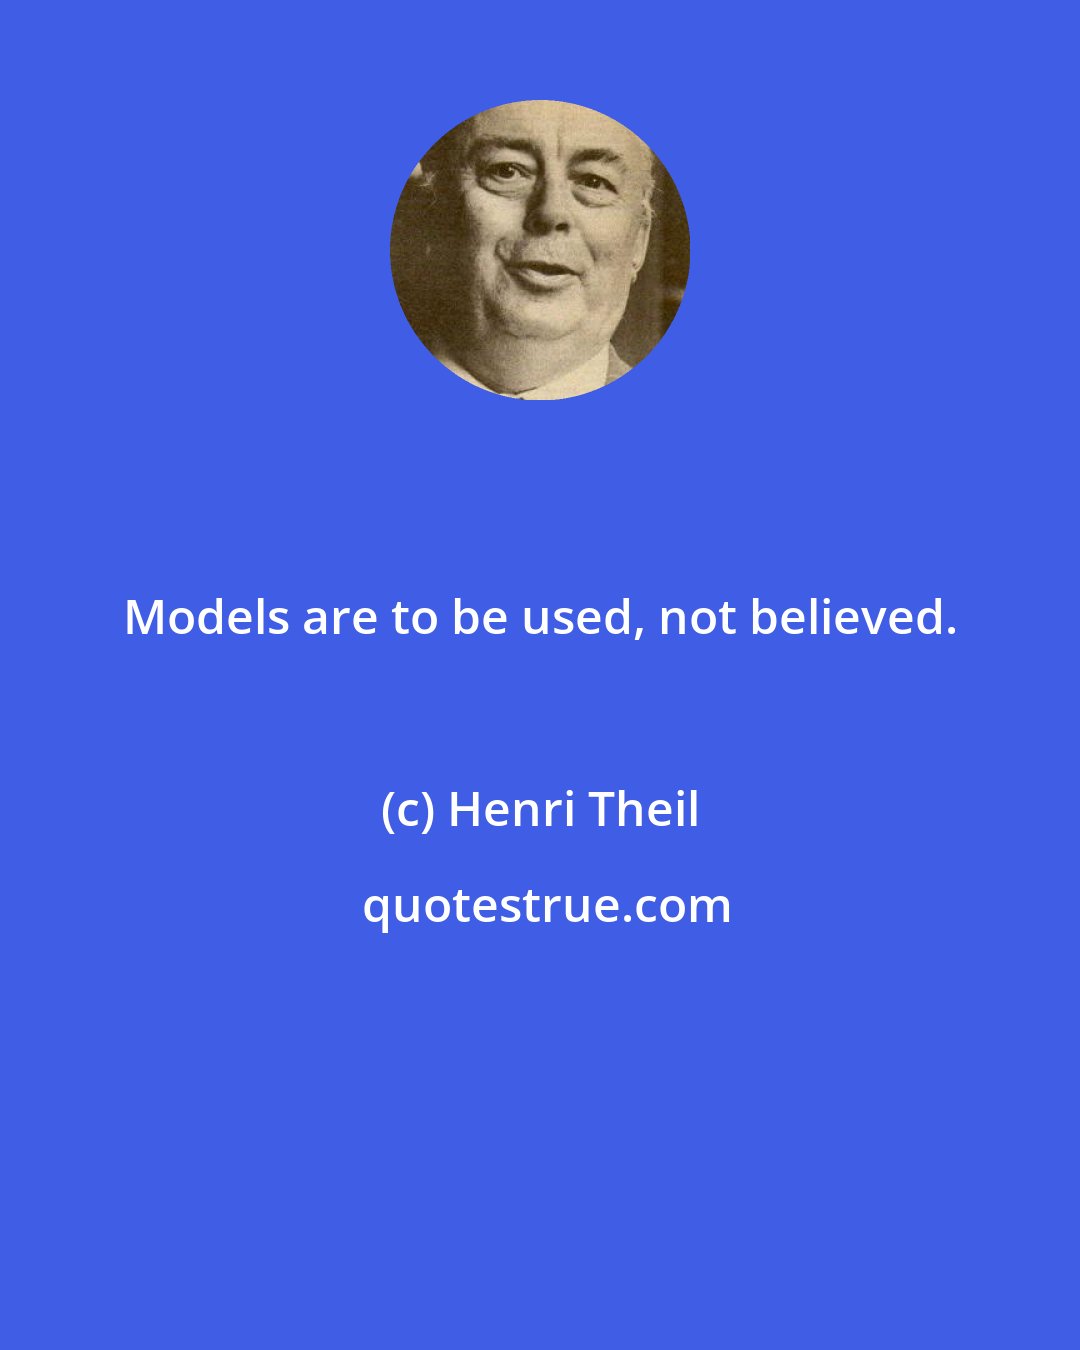 Henri Theil: Models are to be used, not believed.